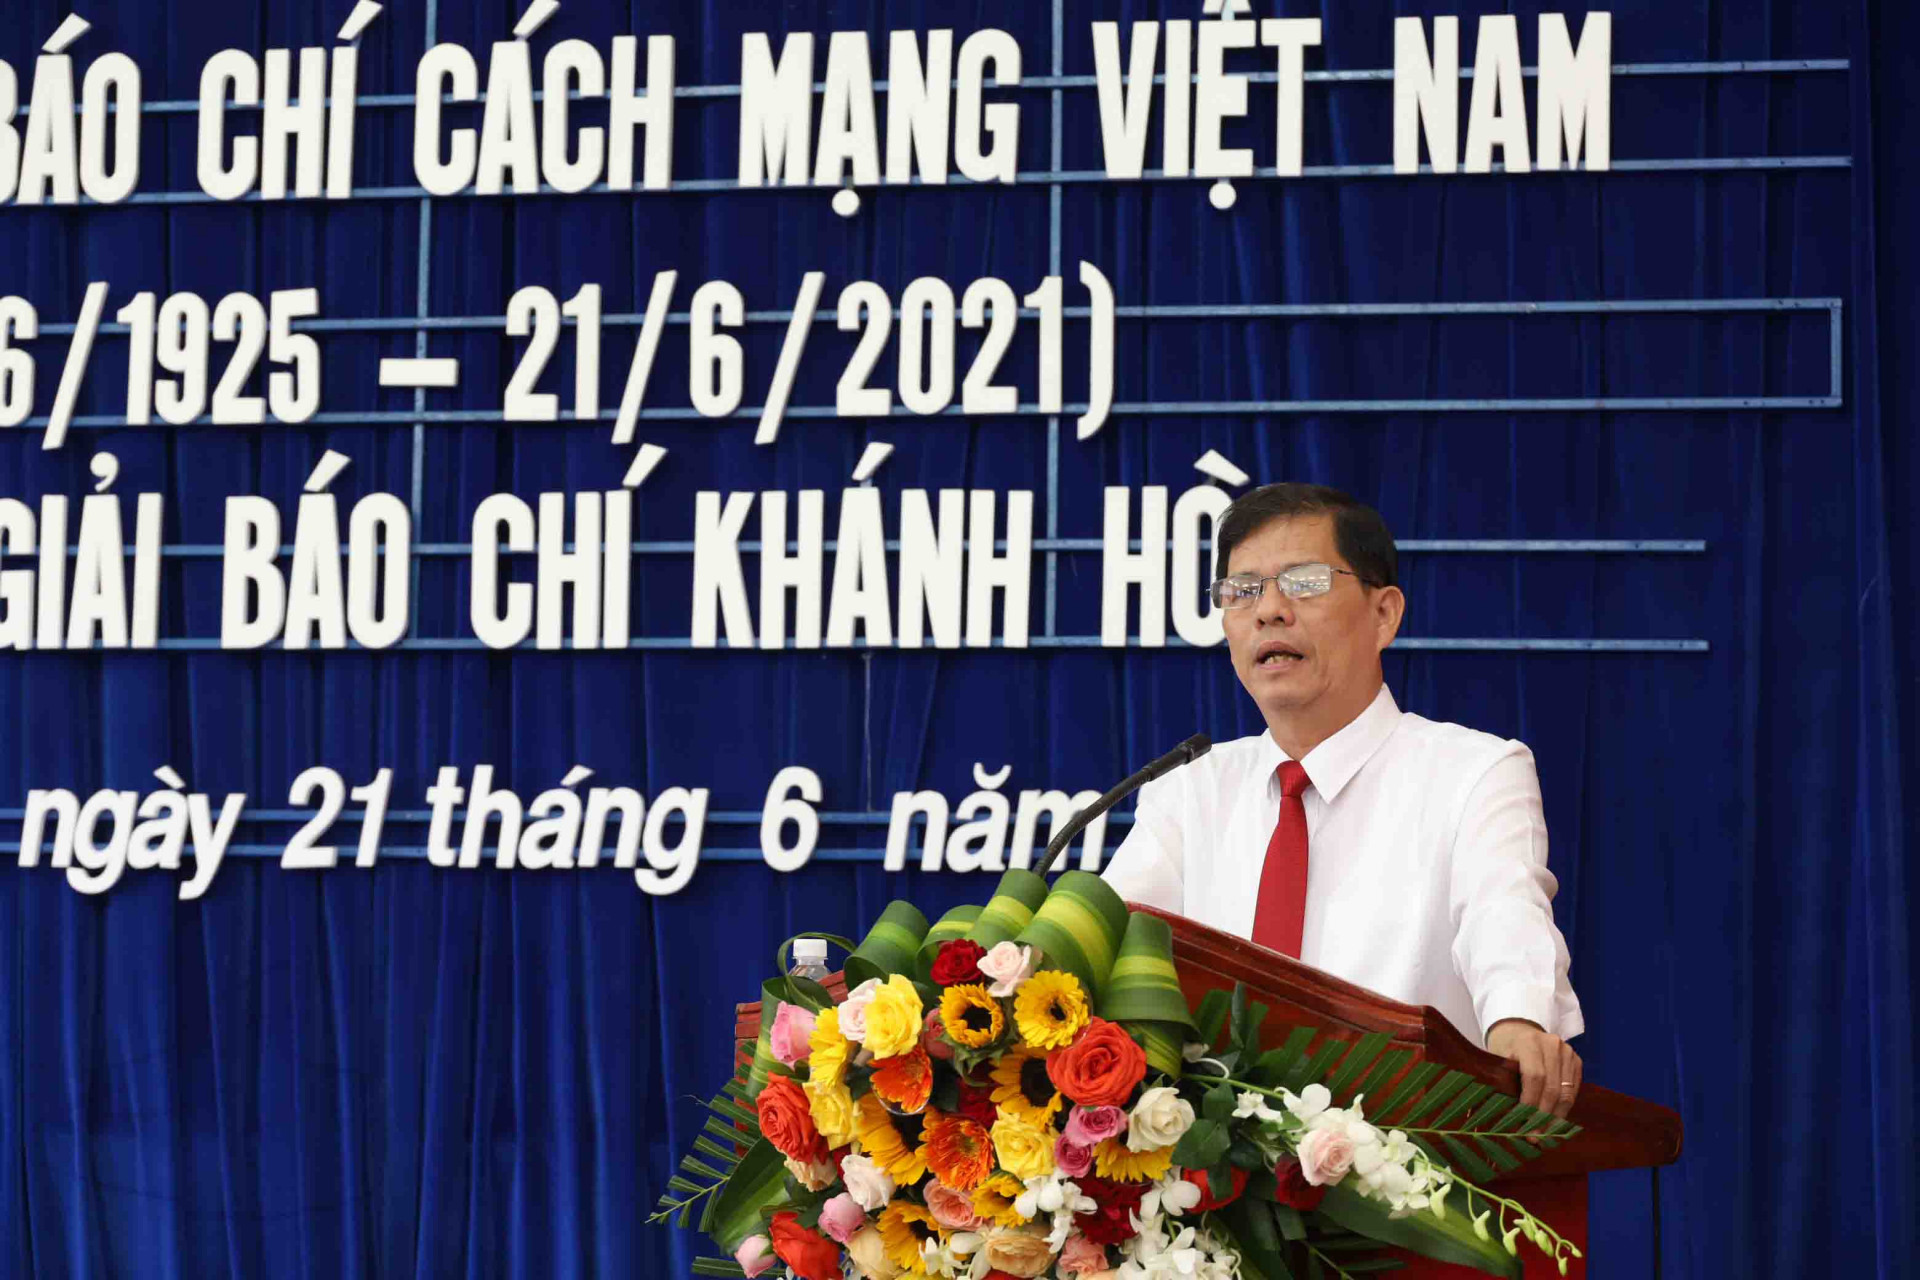 Nguyen Tan Tuan delivering speech at the ceremony